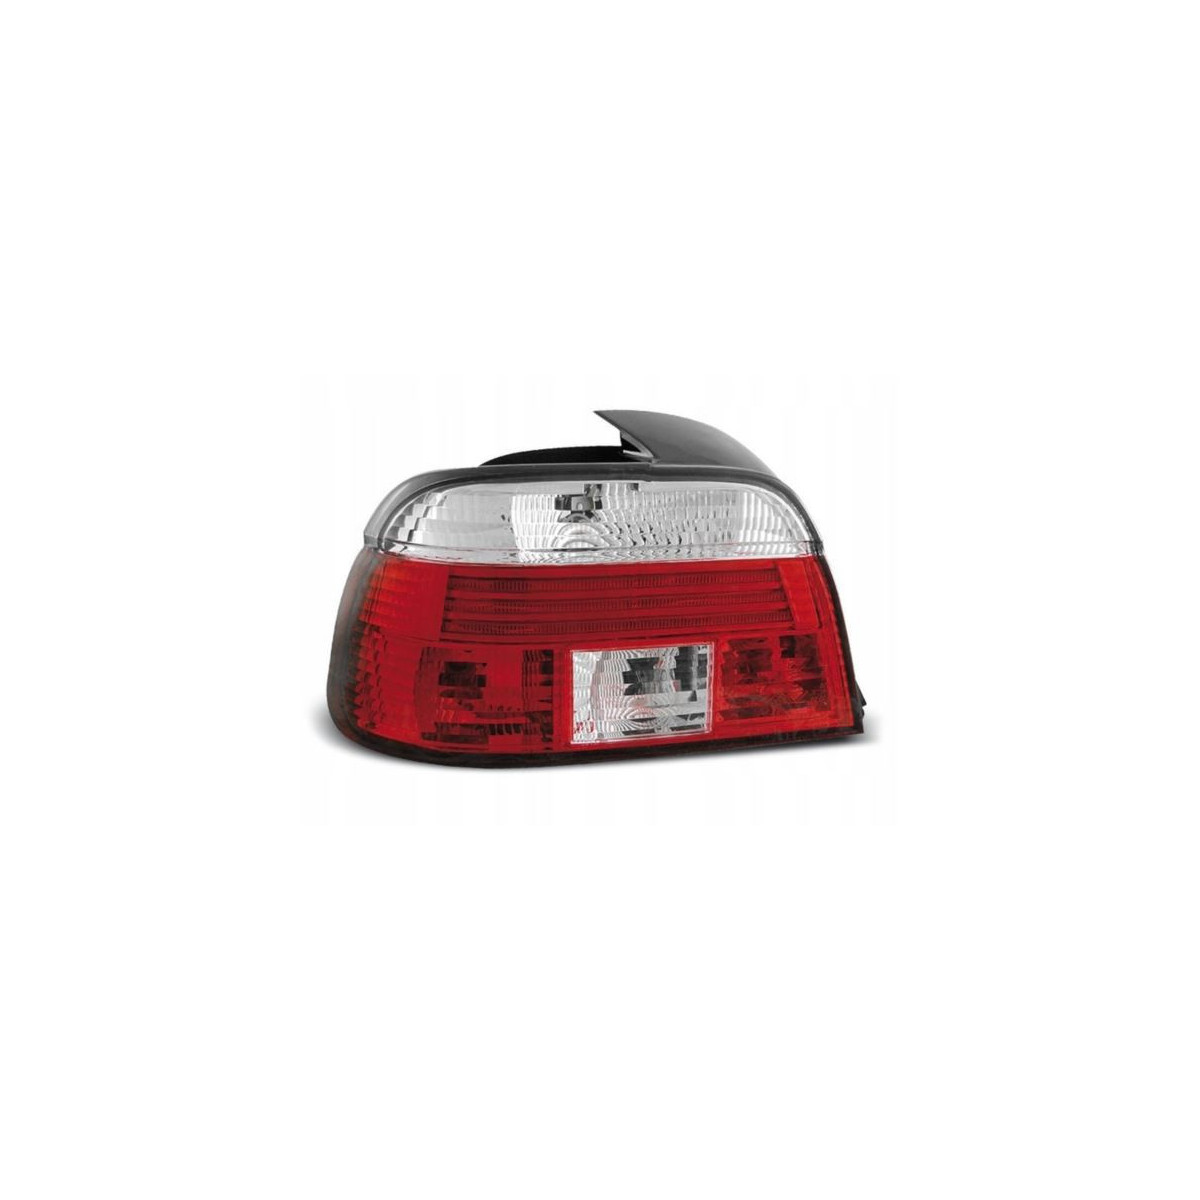 LAMPY TYLNE BMW E39 95-00 CLEAR RED WHITE